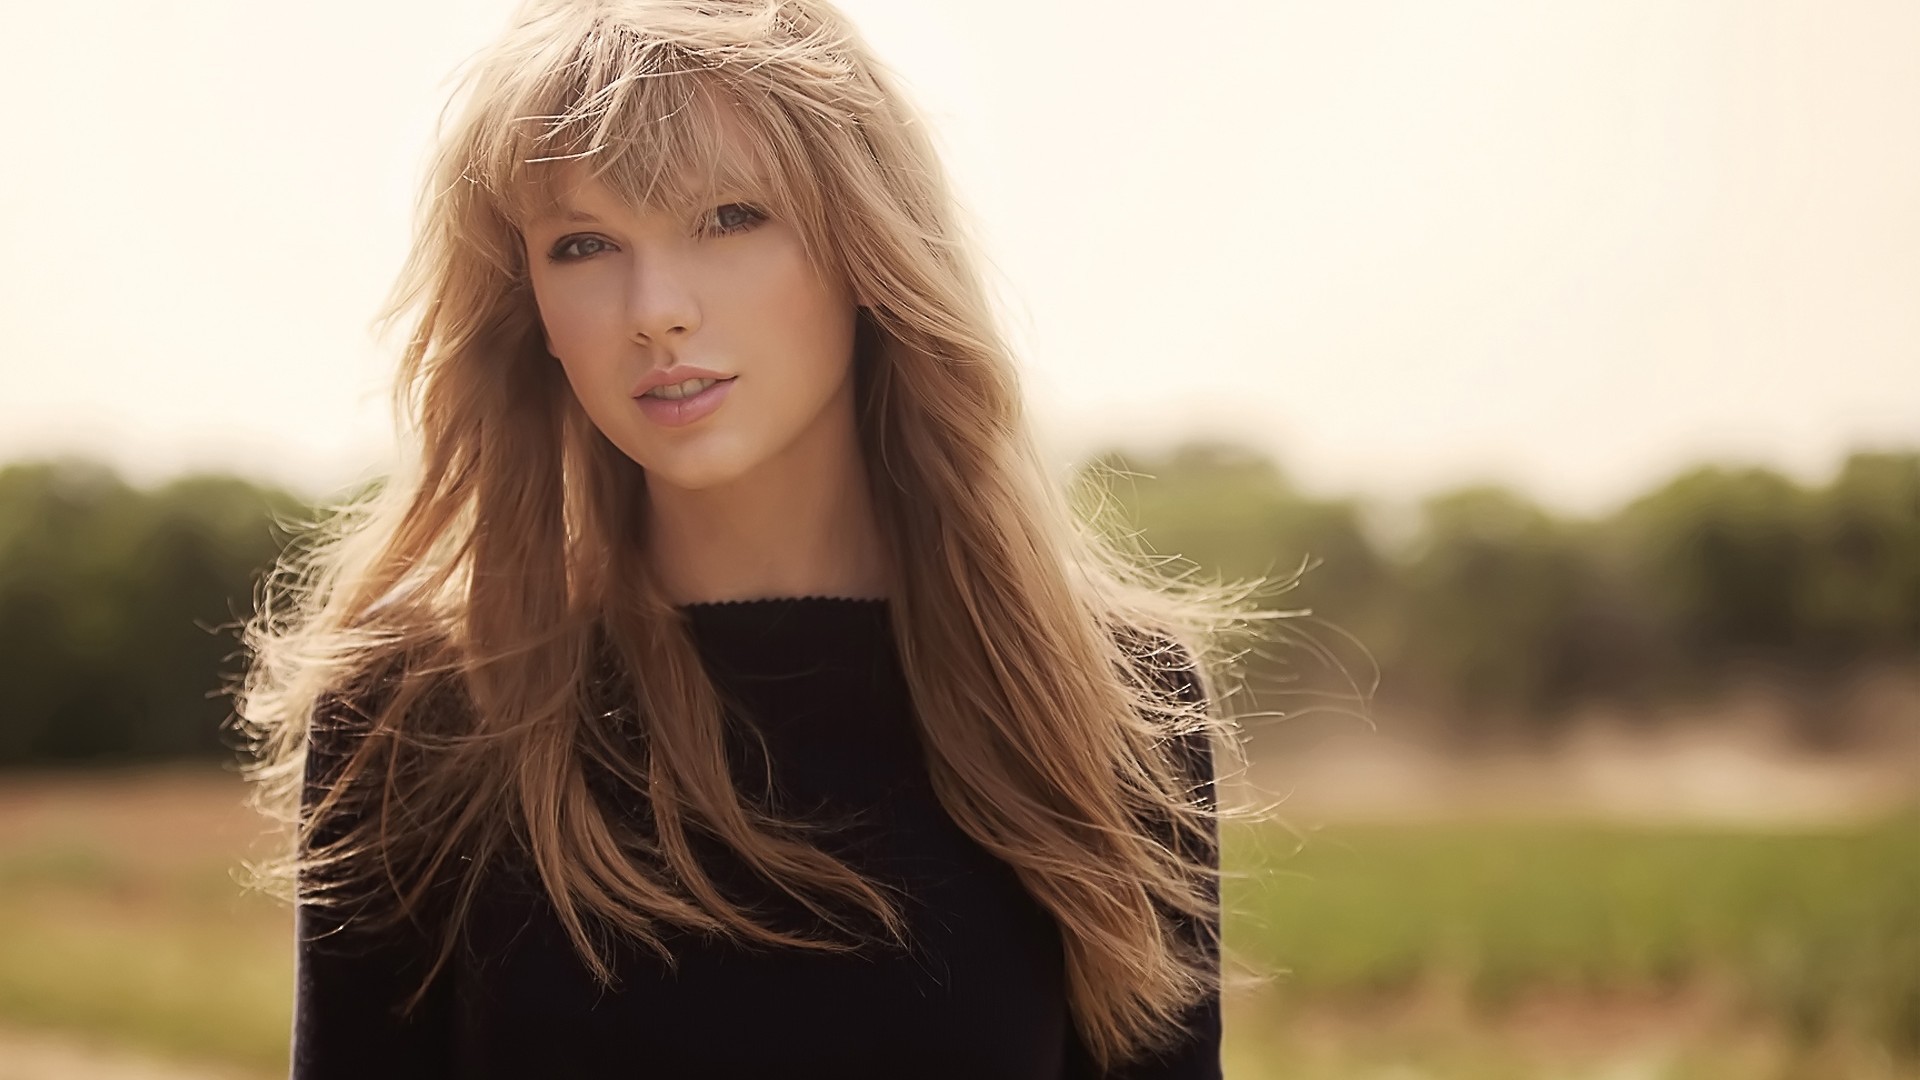 People 1920x1080 Taylor Swift singer women looking at viewer face long hair celebrity women outdoors outdoors makeup